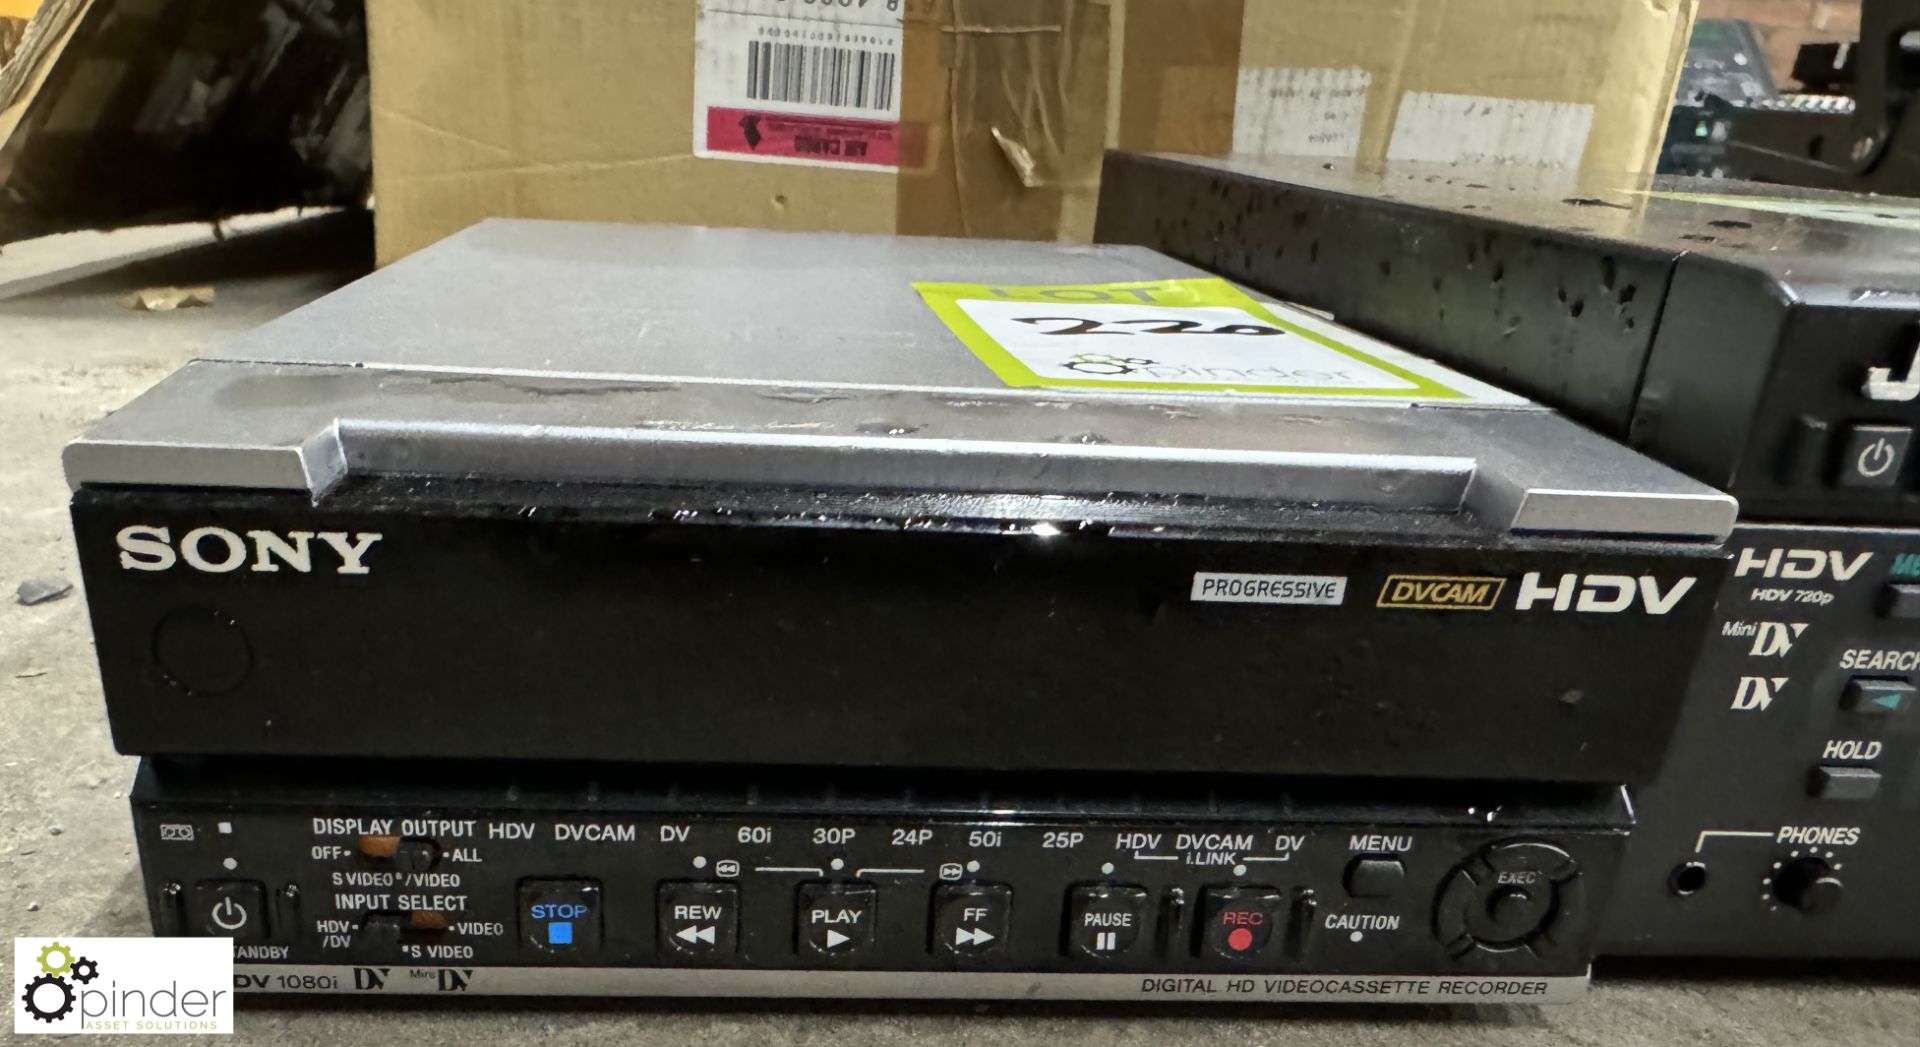 Sony HDV 1080i Digital HD Videocassette Recorder and JVC BR-HD50 DV Recorder - Image 2 of 4